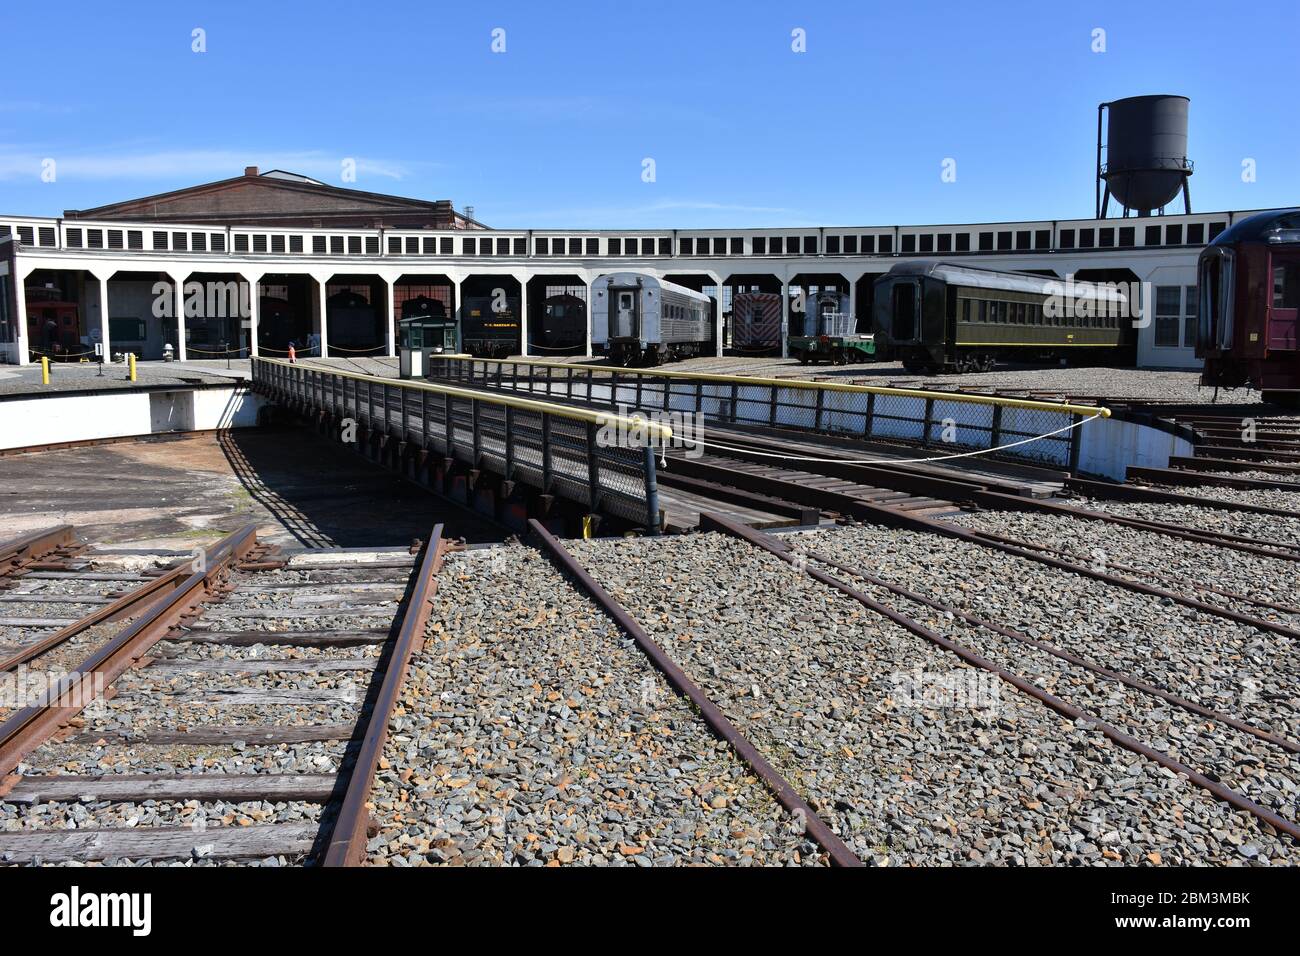 The Bob Julian Roundhouse was once a part of the Southern Railway and is now a part of the N. C. Transportation Museum. Stock Photo